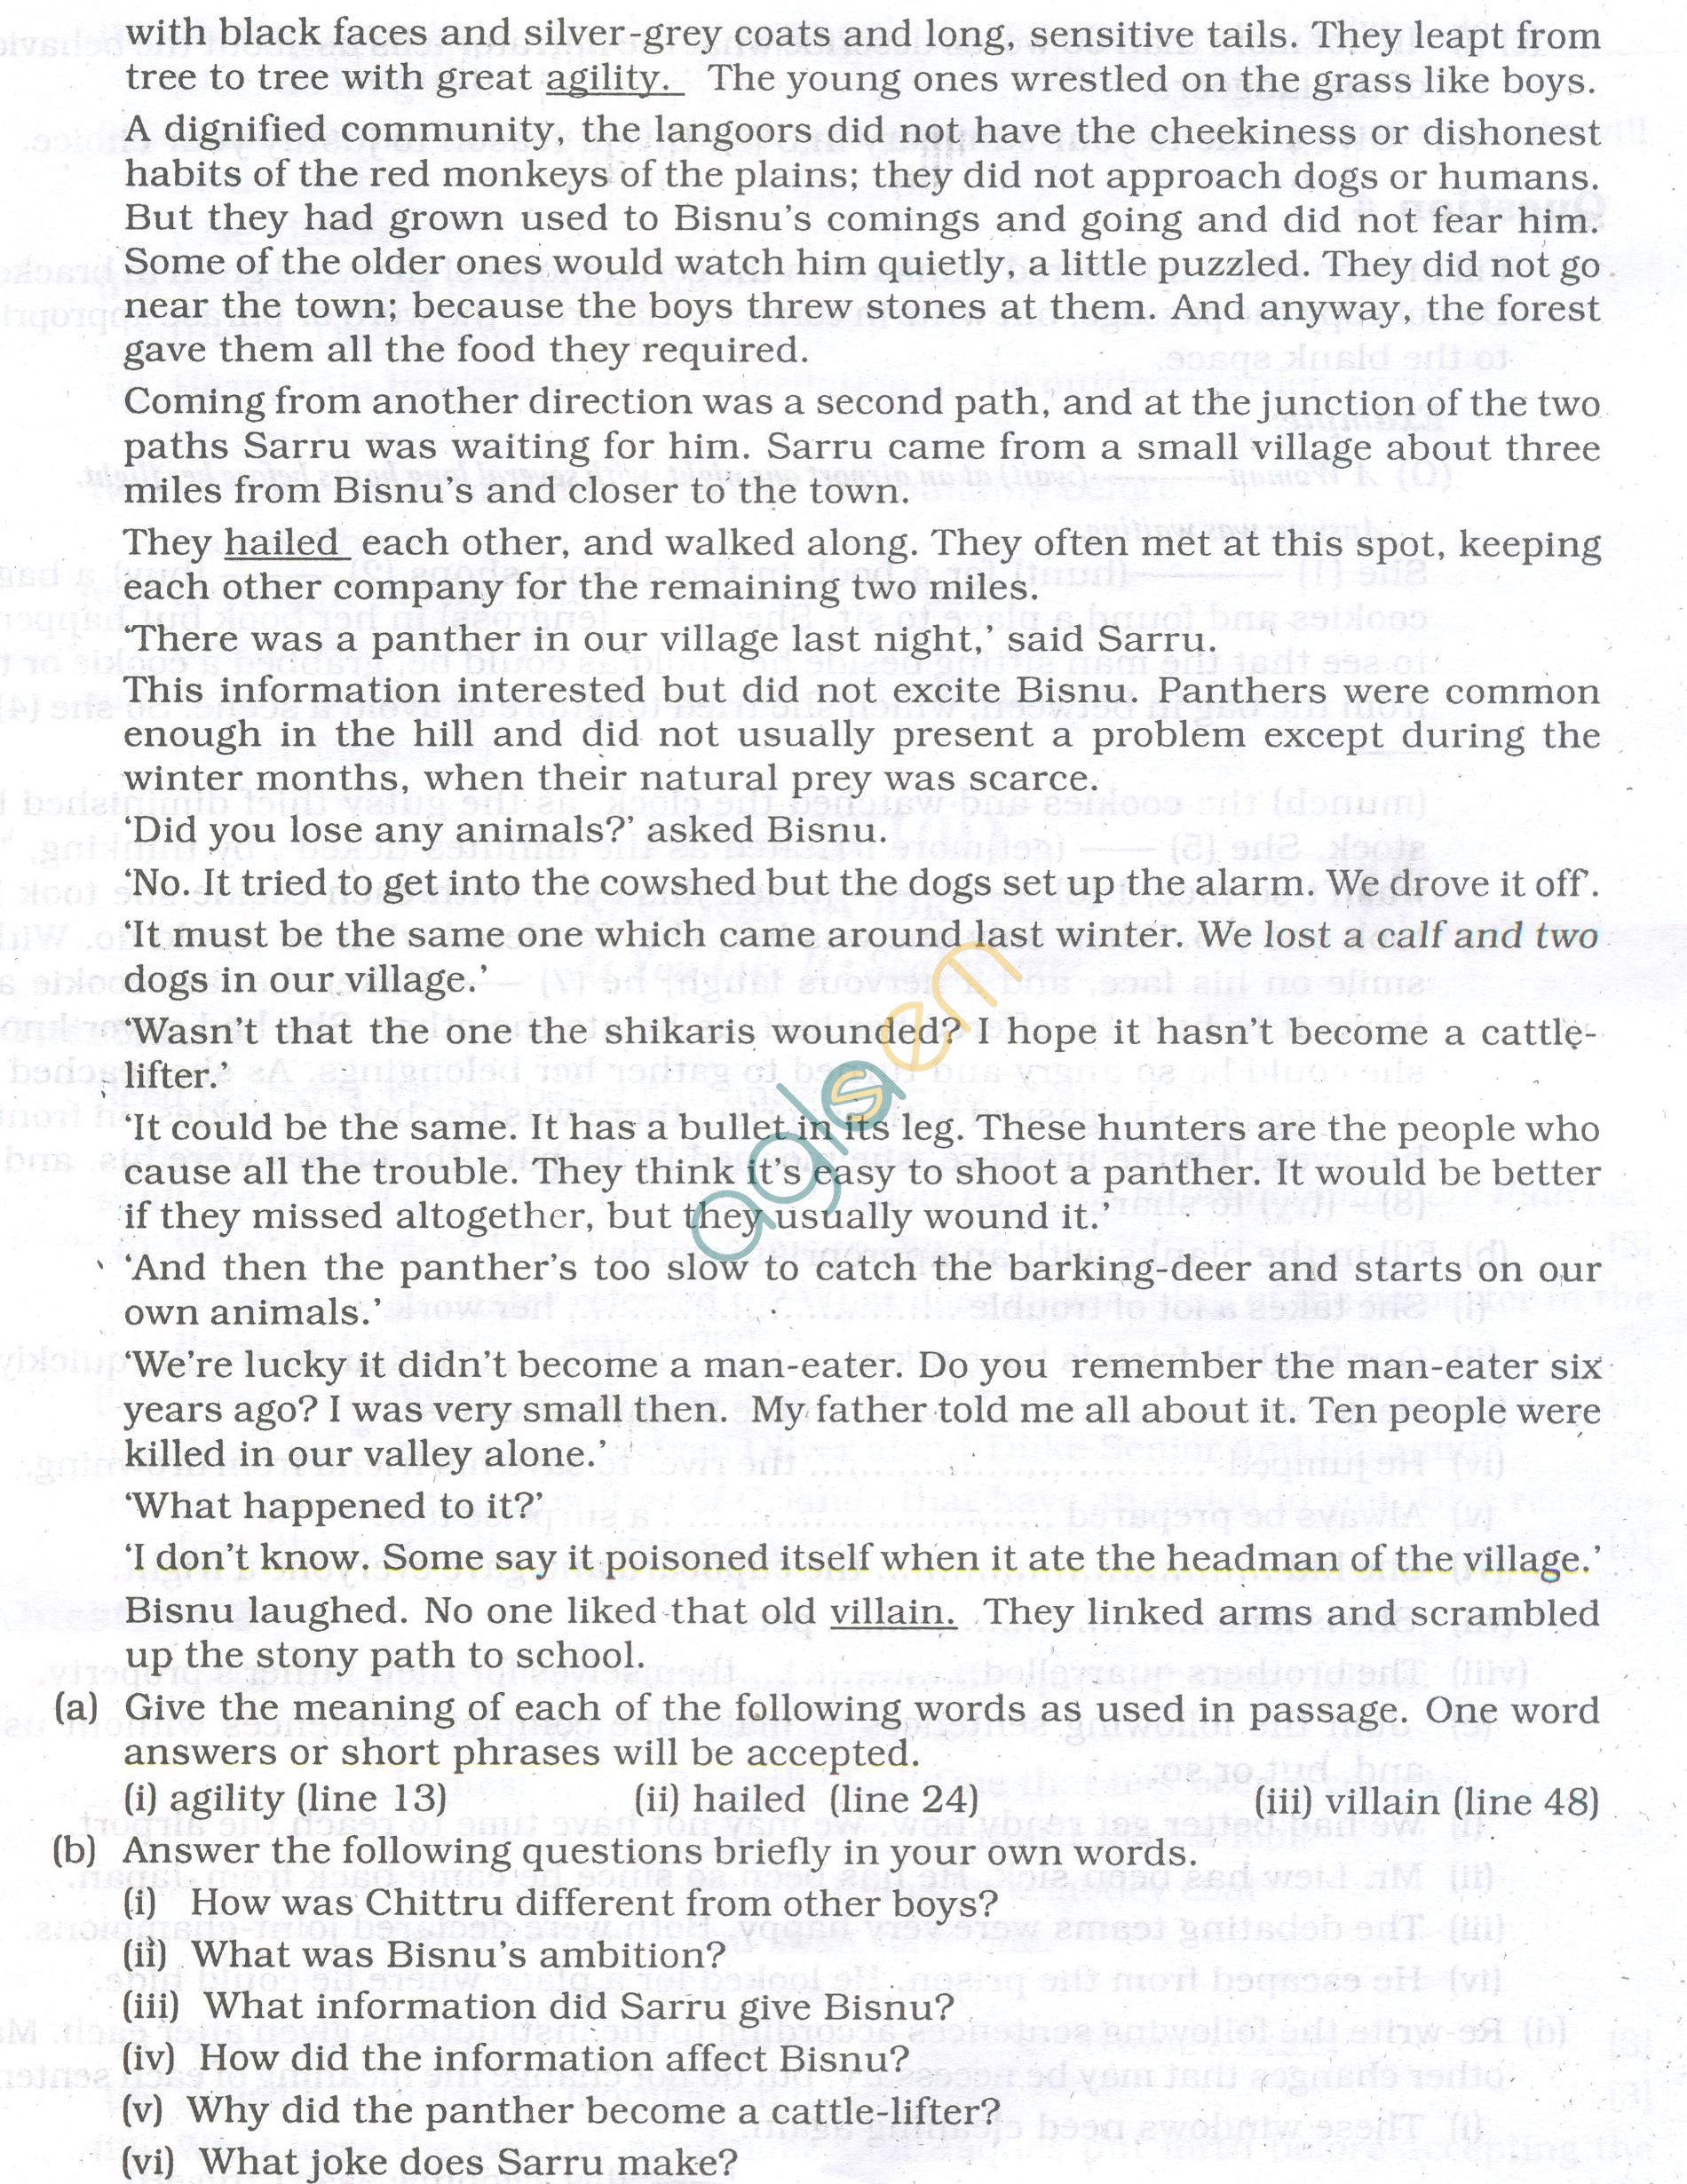 ICSE Question Papers 2013 for Class 10 - English Paper - 1